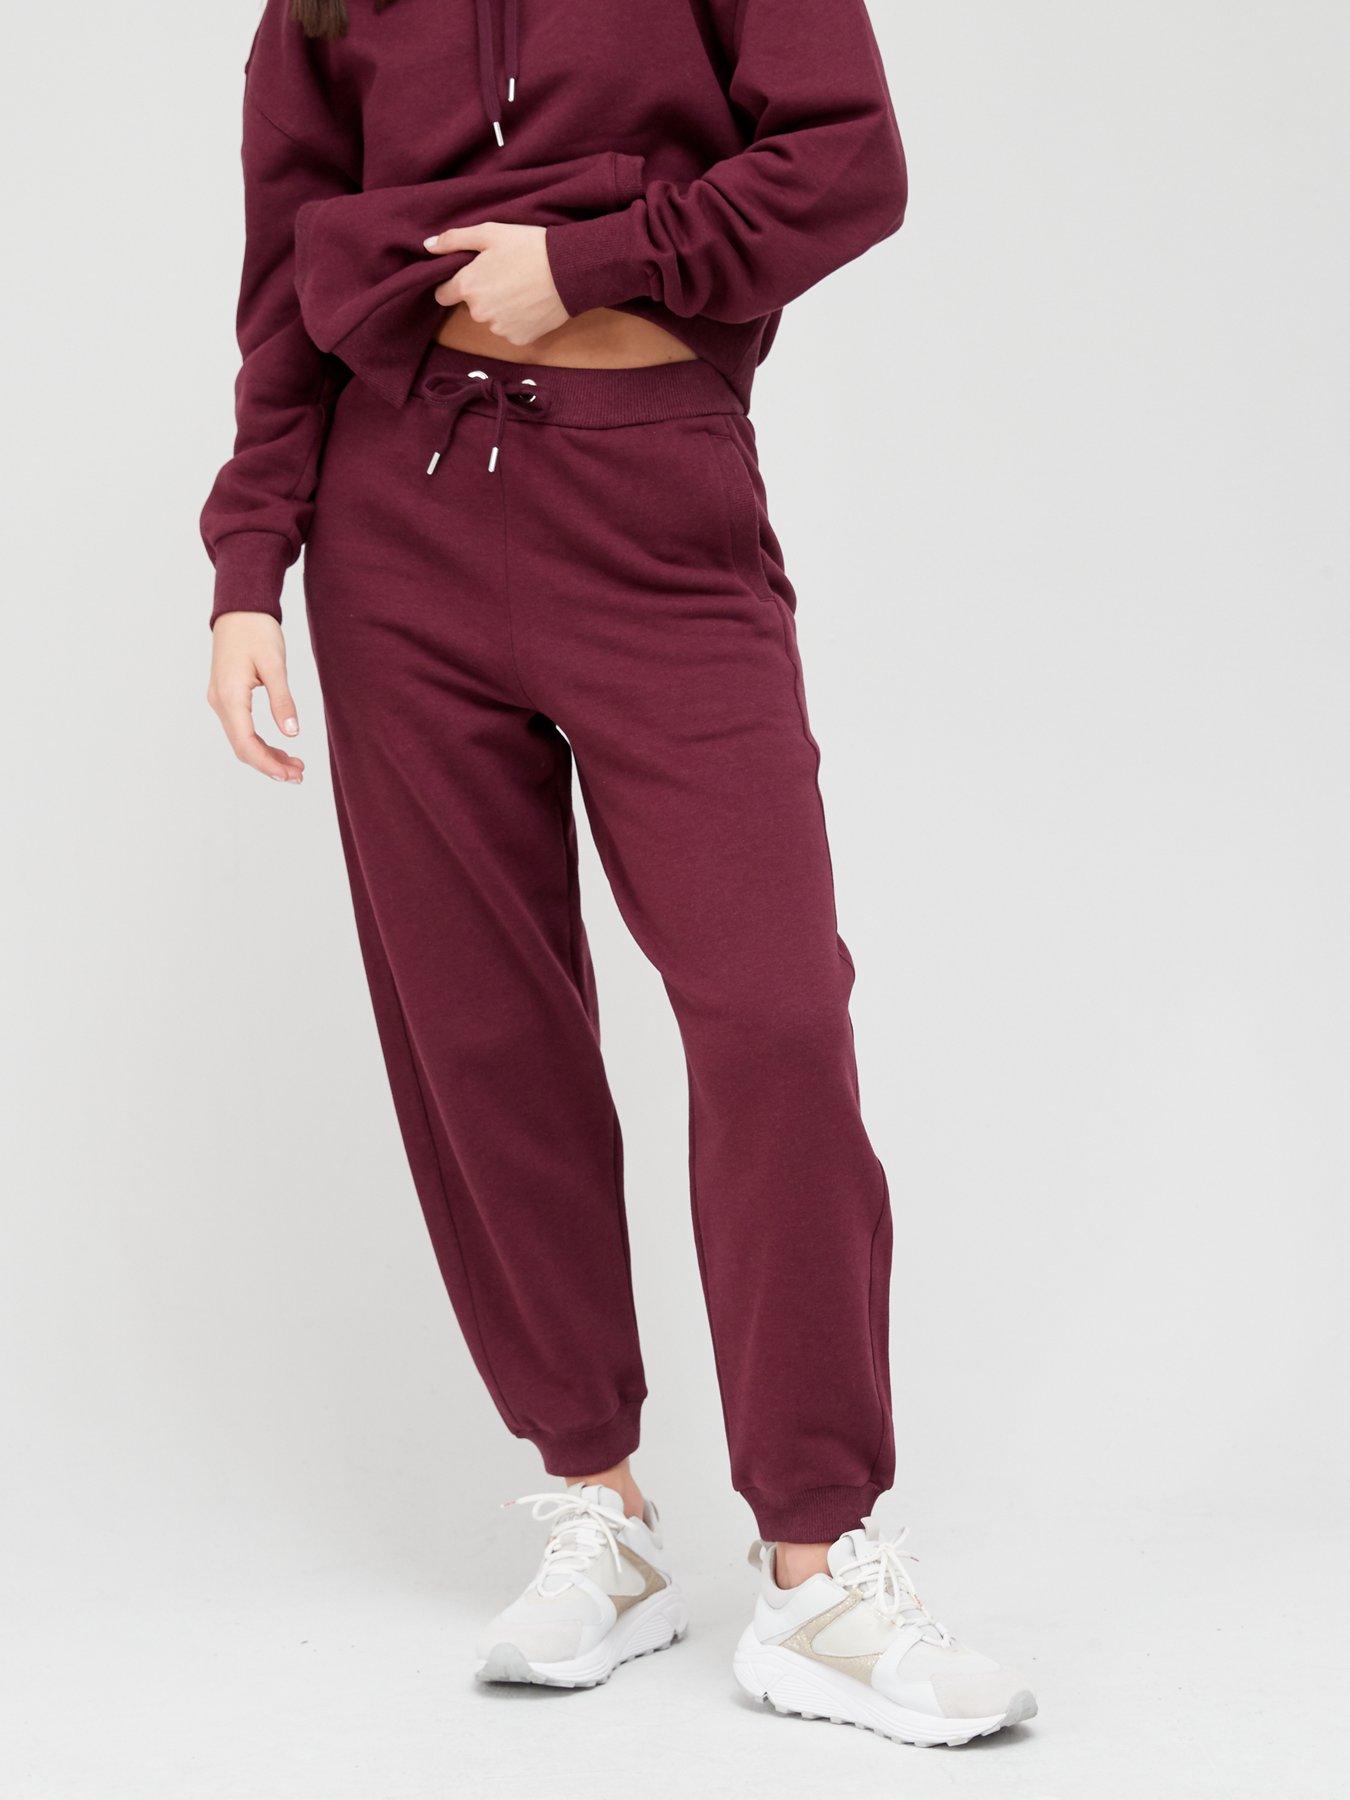 Trousers & Leggings Cotton Mix Jogger - Dark Red